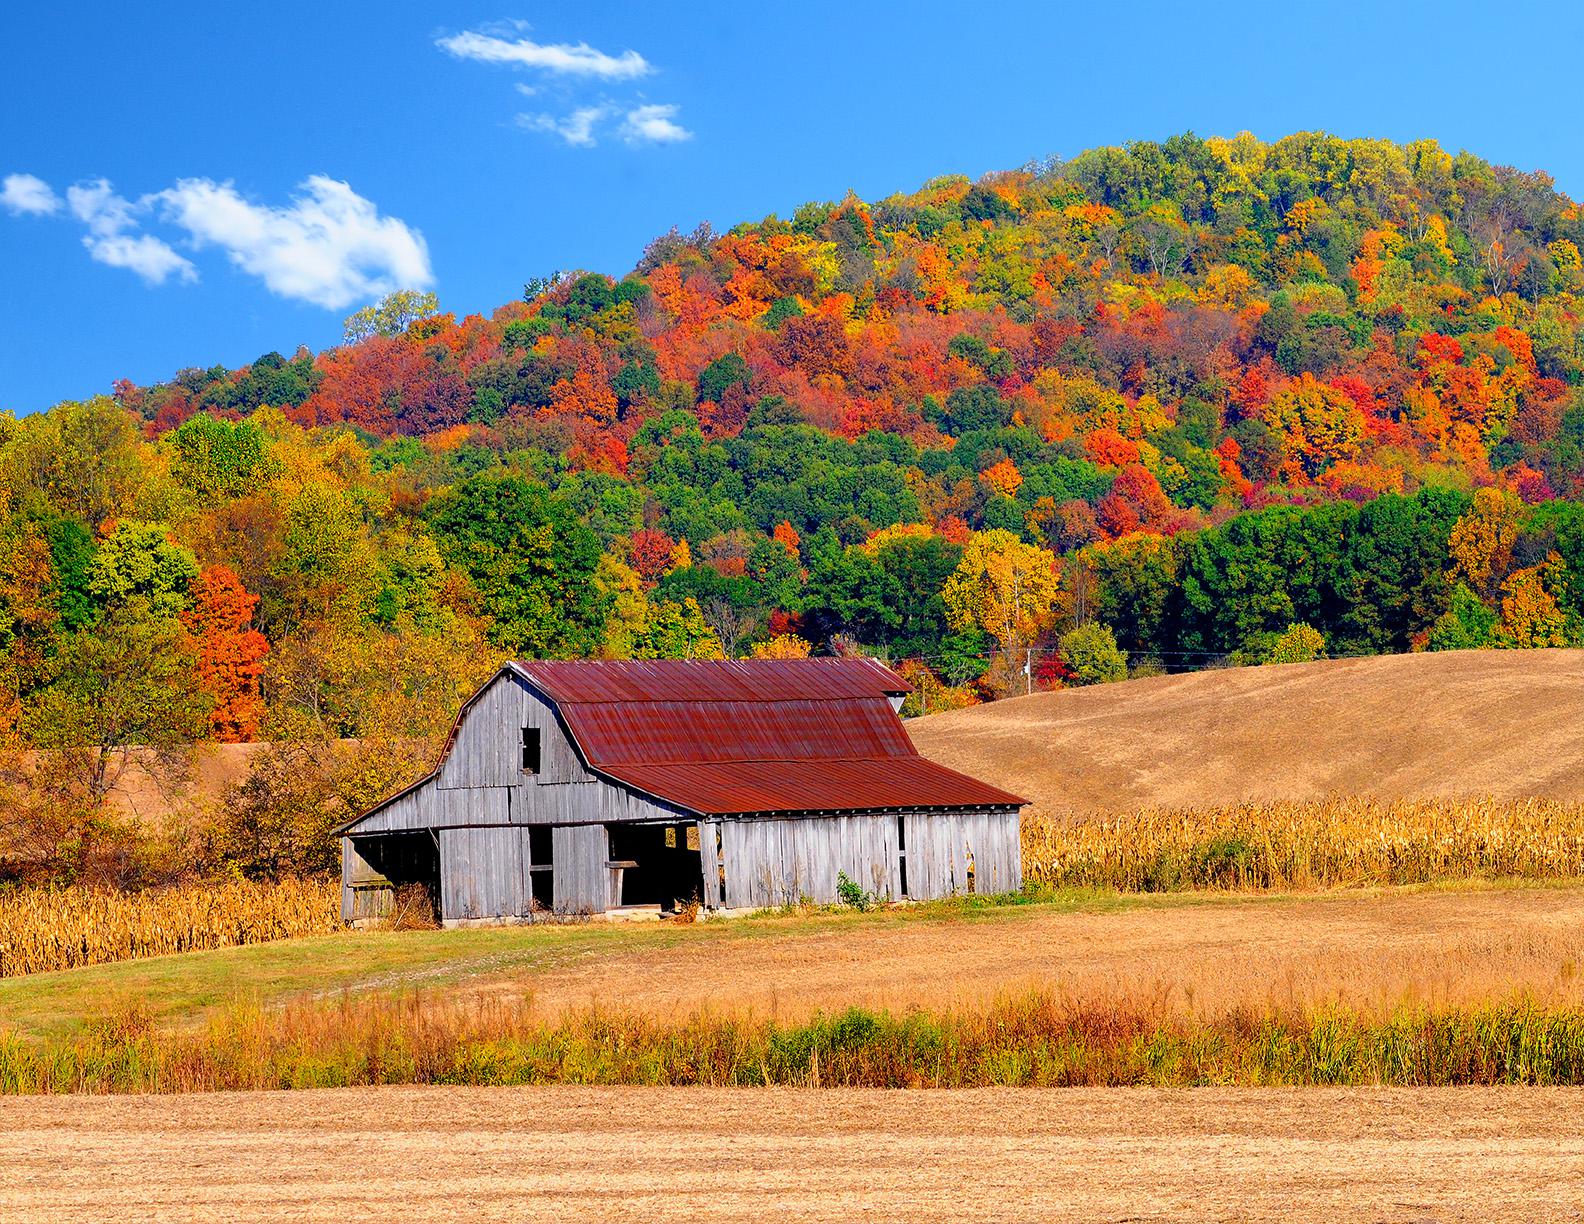 Autumn Barn High Quality And Resolution Wallpaper On